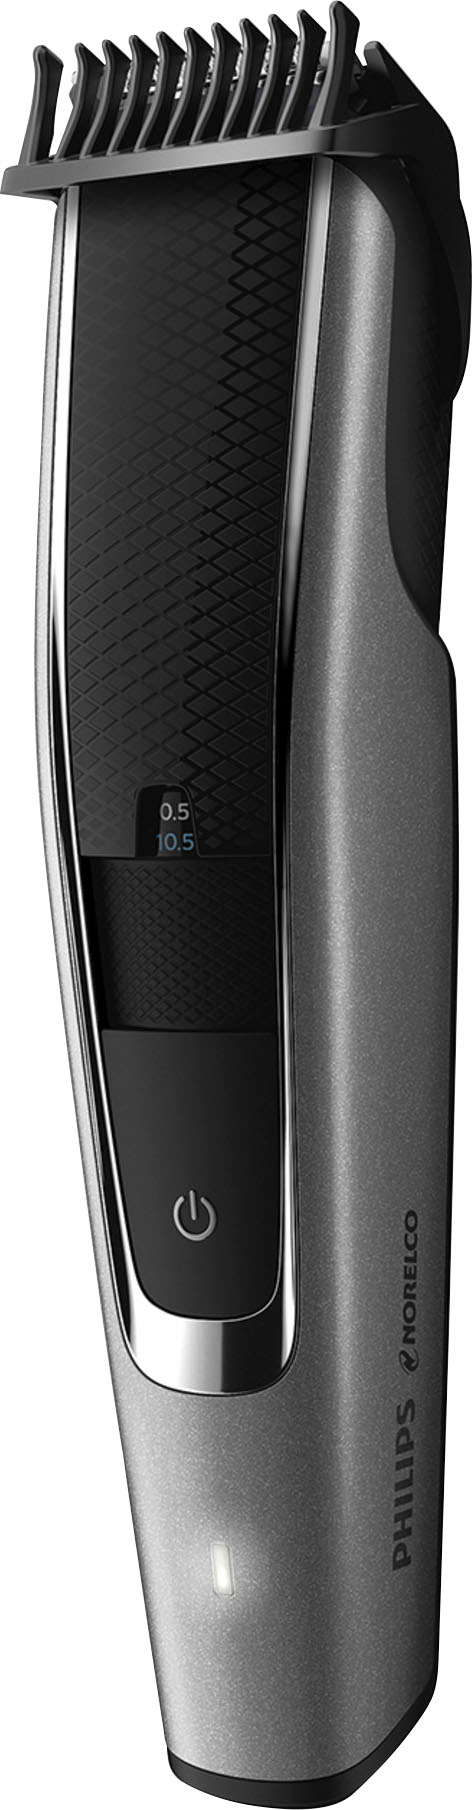 Philips Norelco Beard Trimmer and Hair Clipper Series 5000, BT5502/40 Black  And Silver BT5502/40 - Best Buy